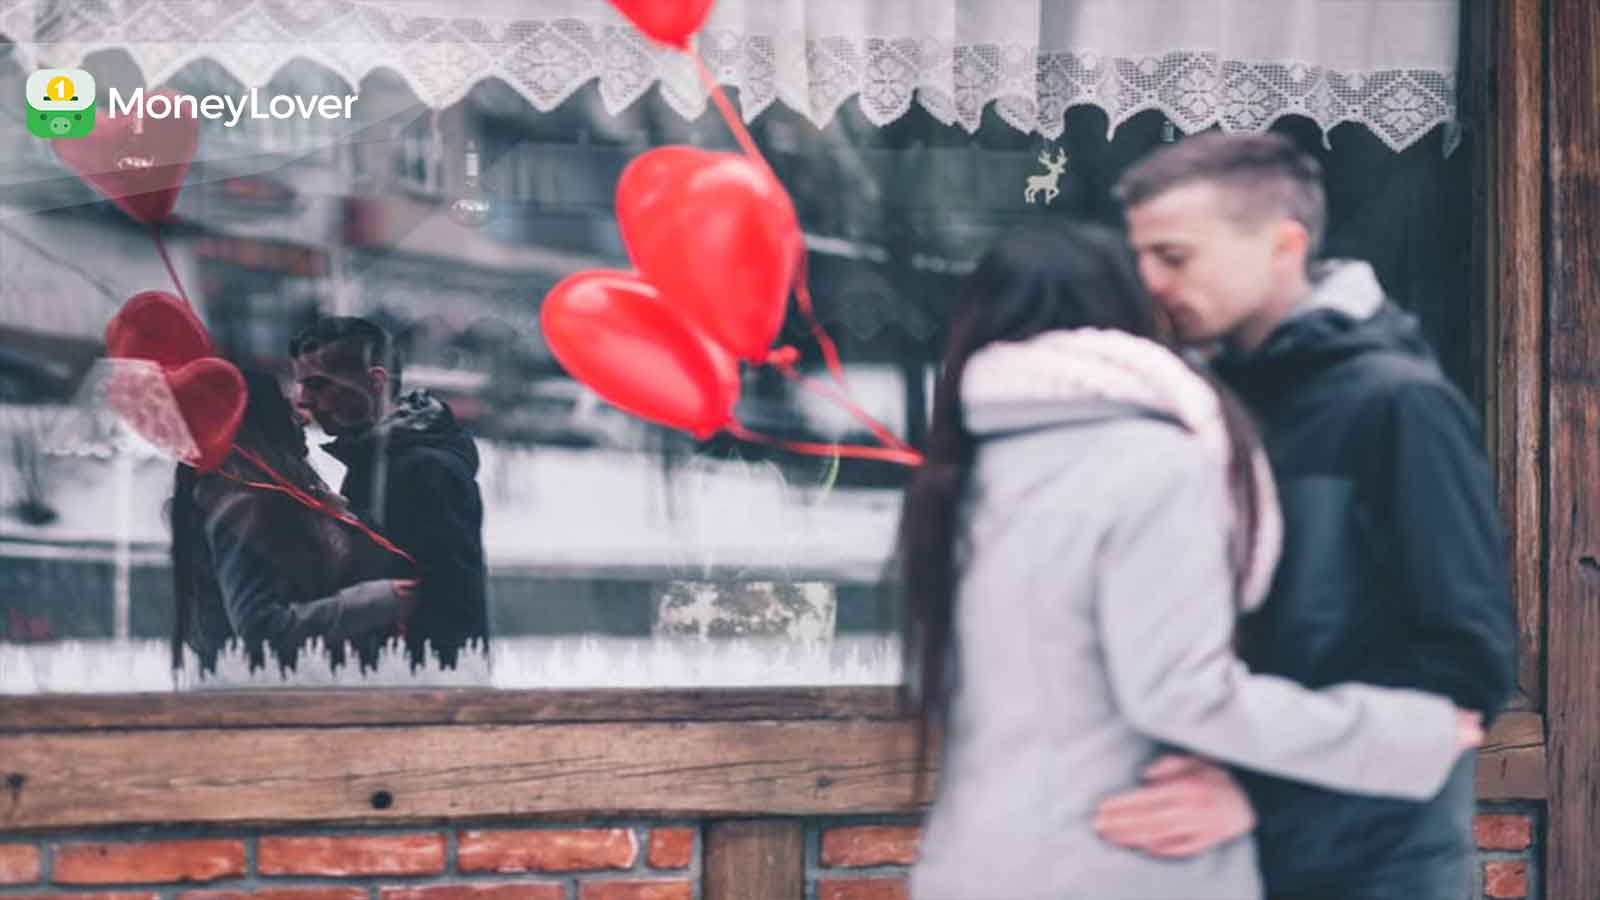 21 Valentine's Day 2017 ideas: plan your perfect date on a budget